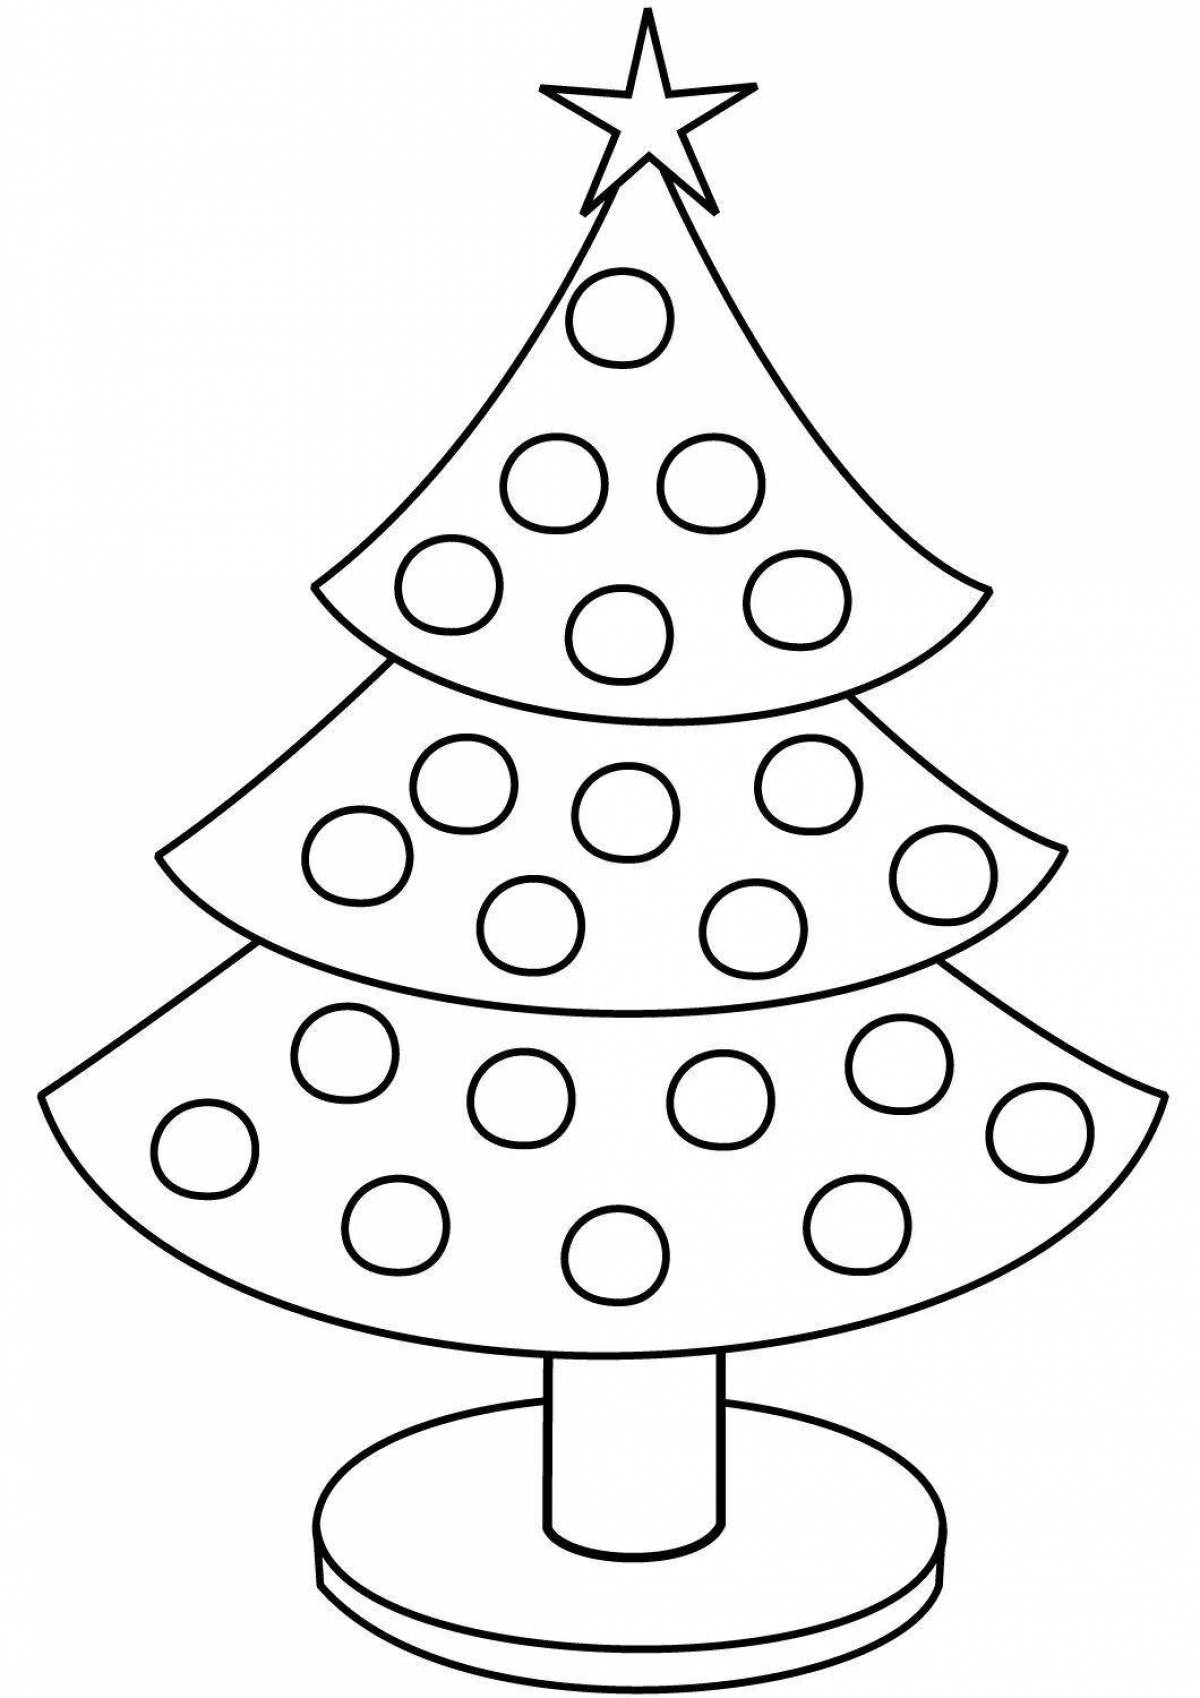 Bright Christmas tree with balls for preschoolers